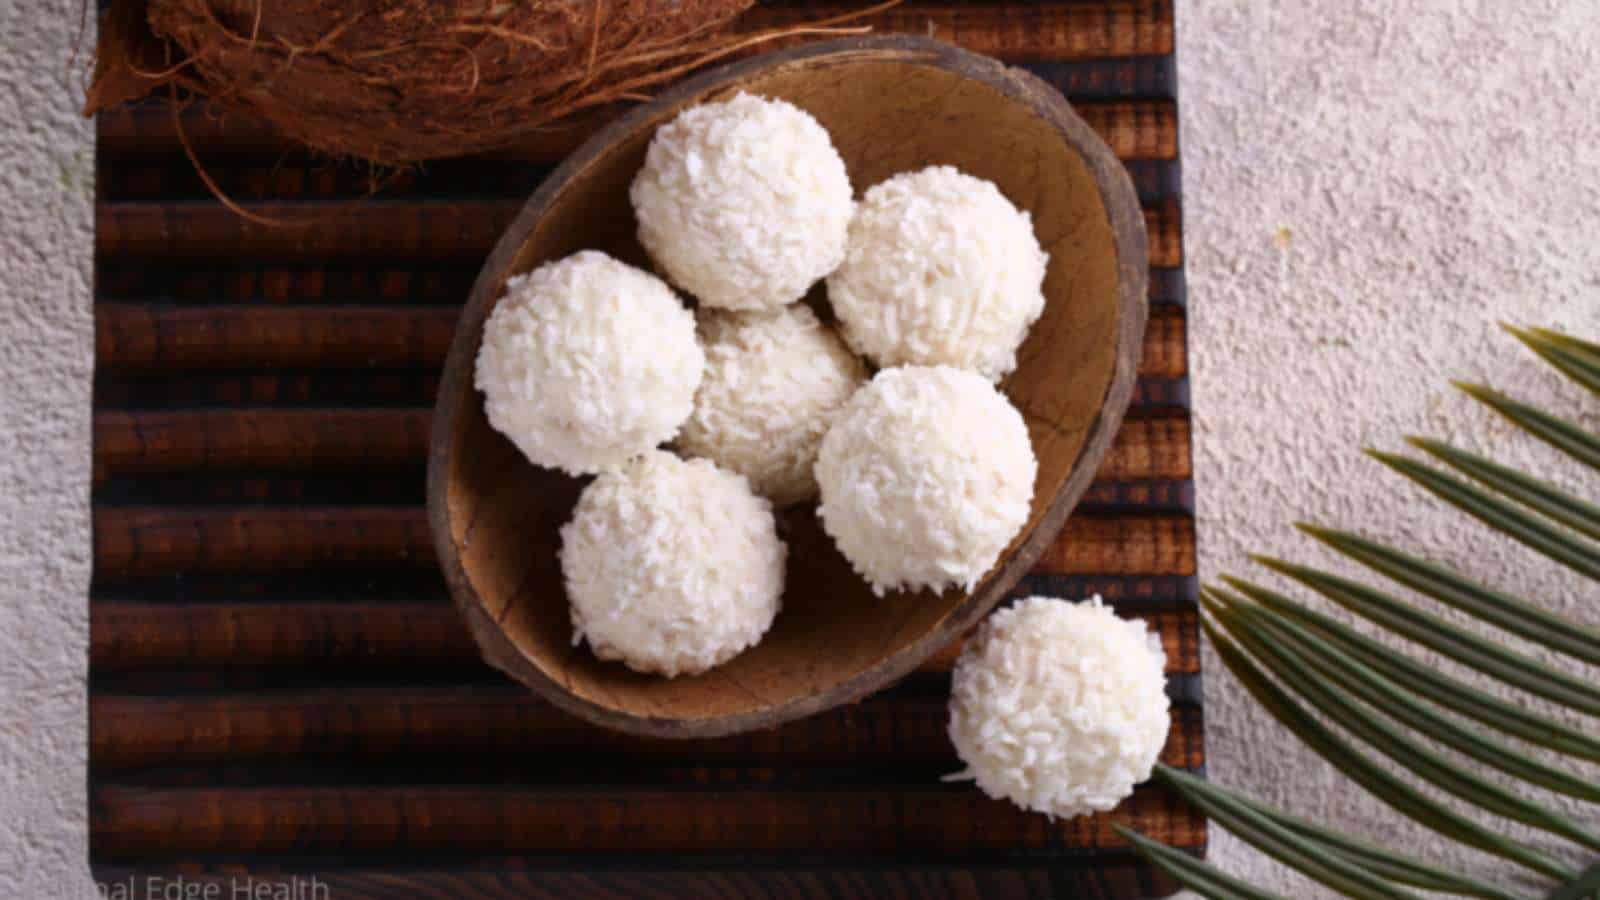 No-bake coconut macaroons in coconut shell on stripped cloth.